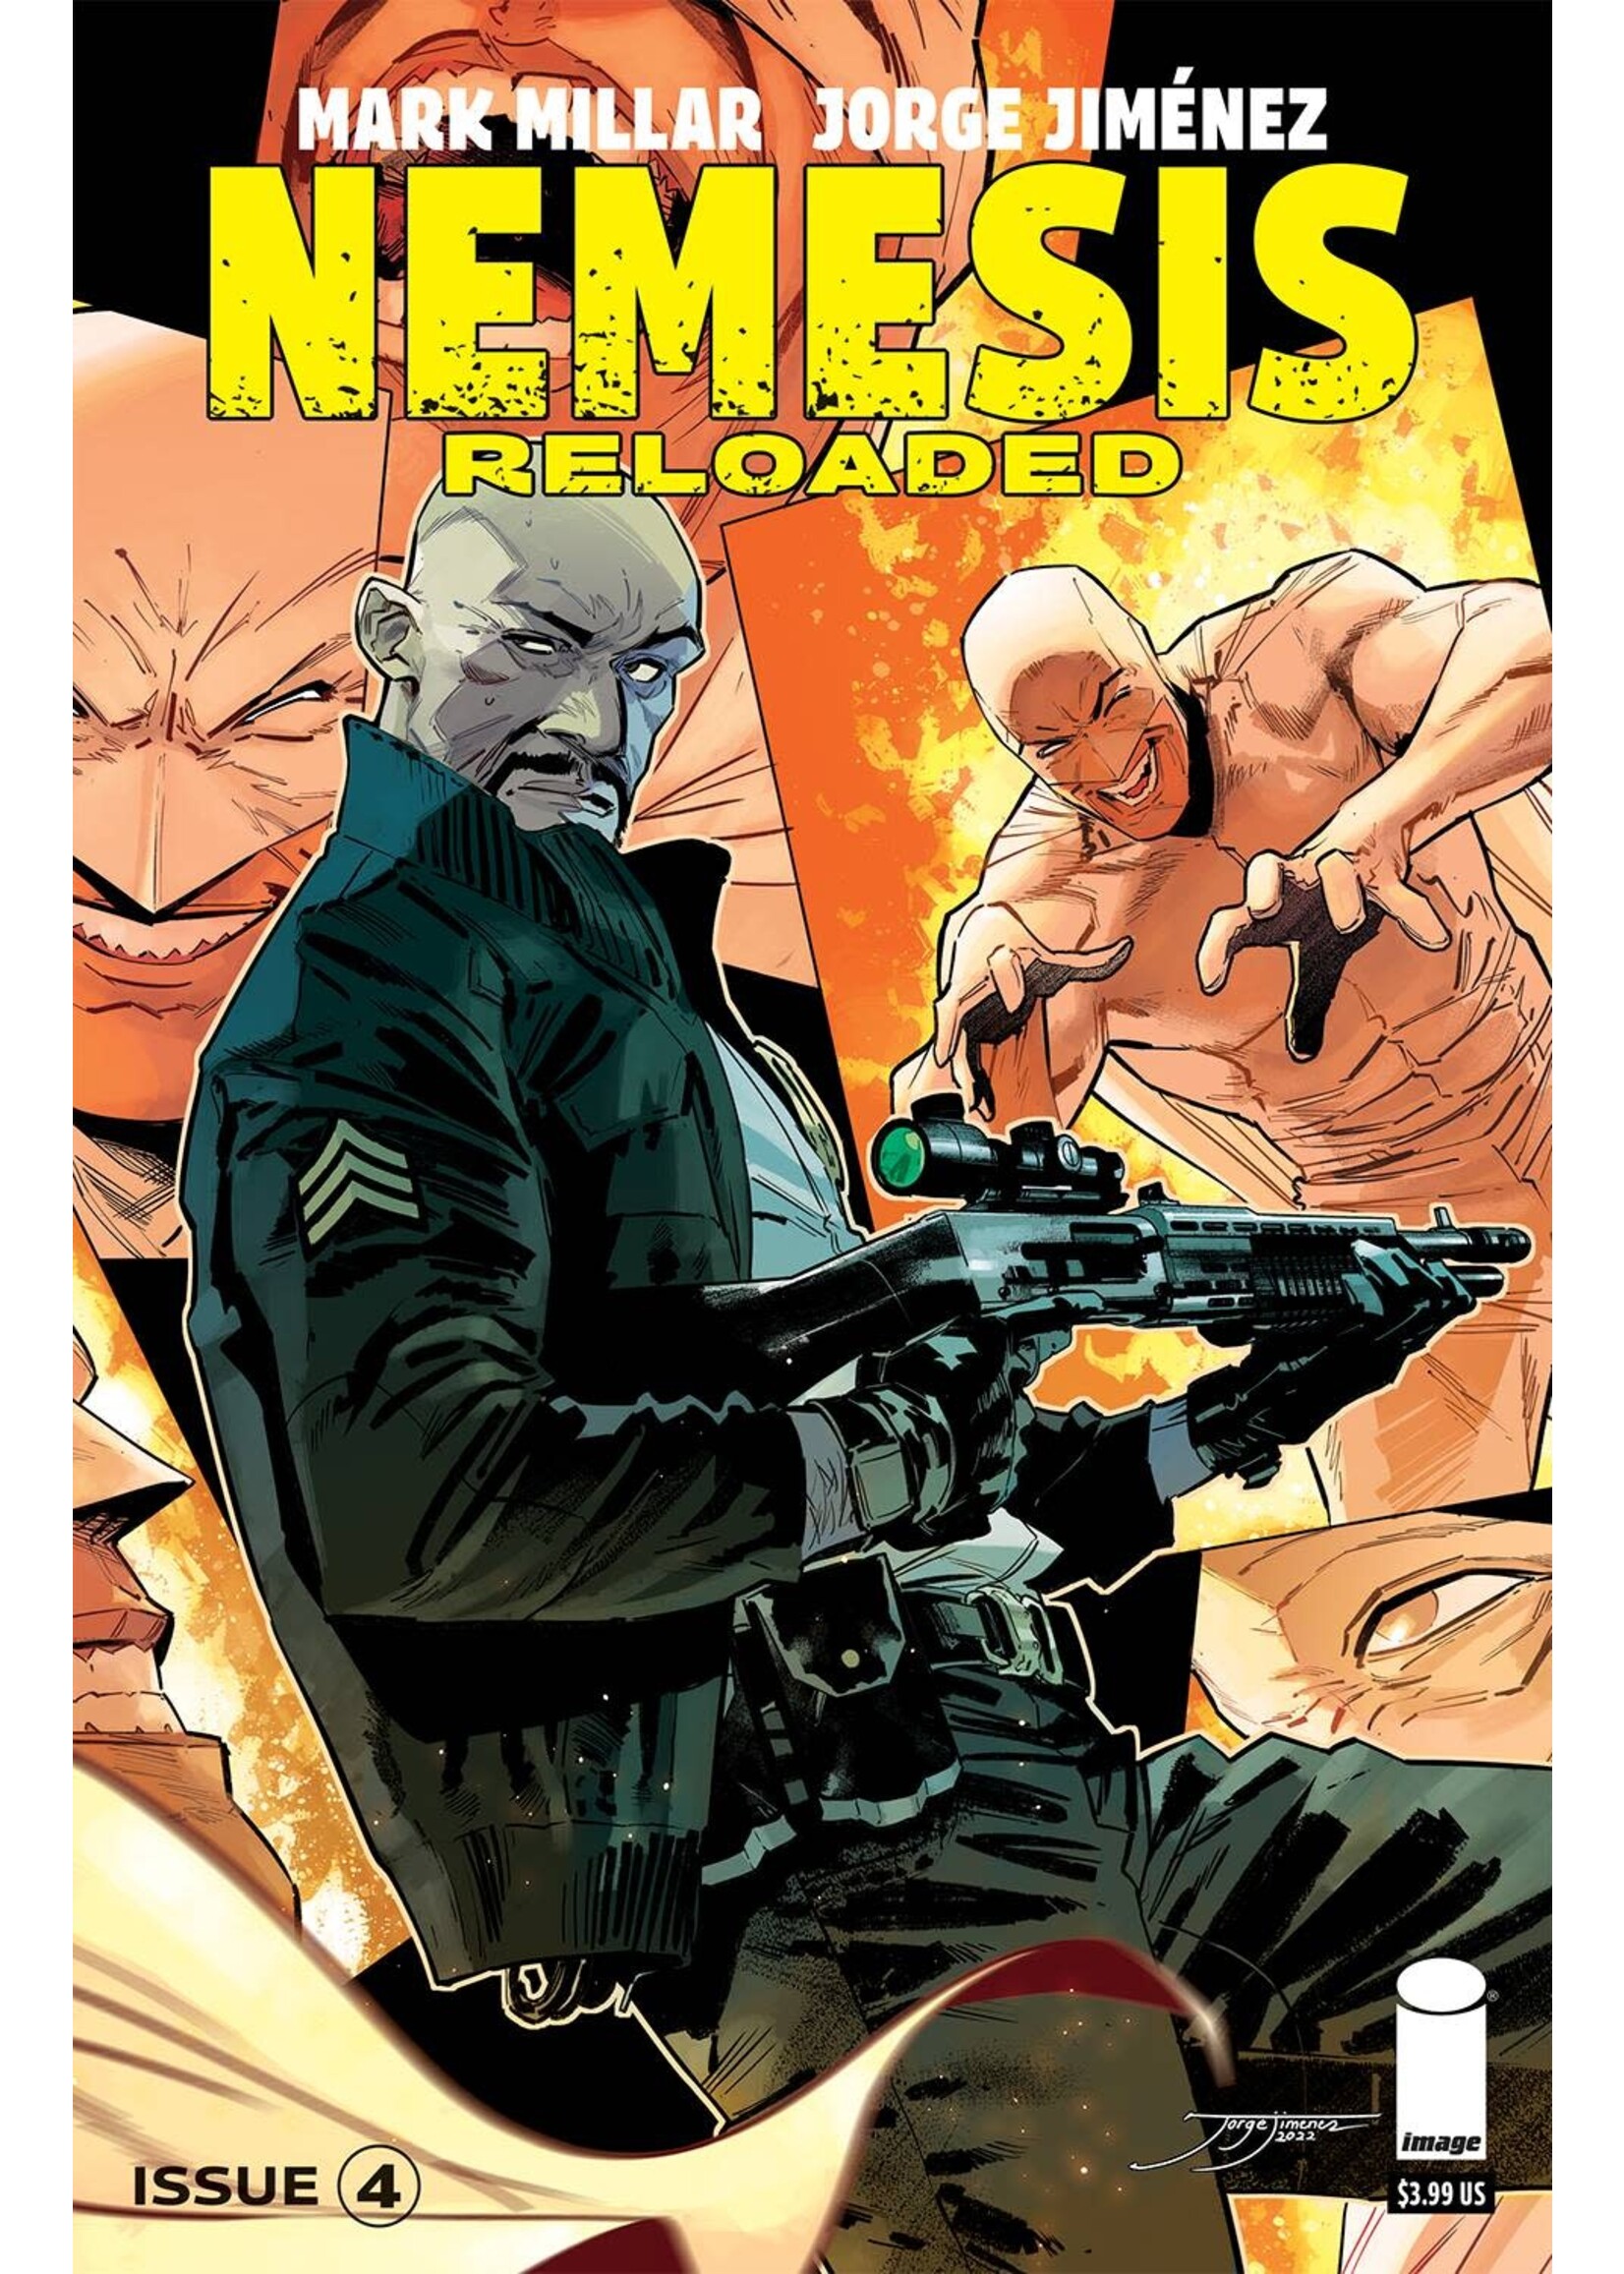 IMAGE COMICS NEMESIS RELOADED complete 5 issues series